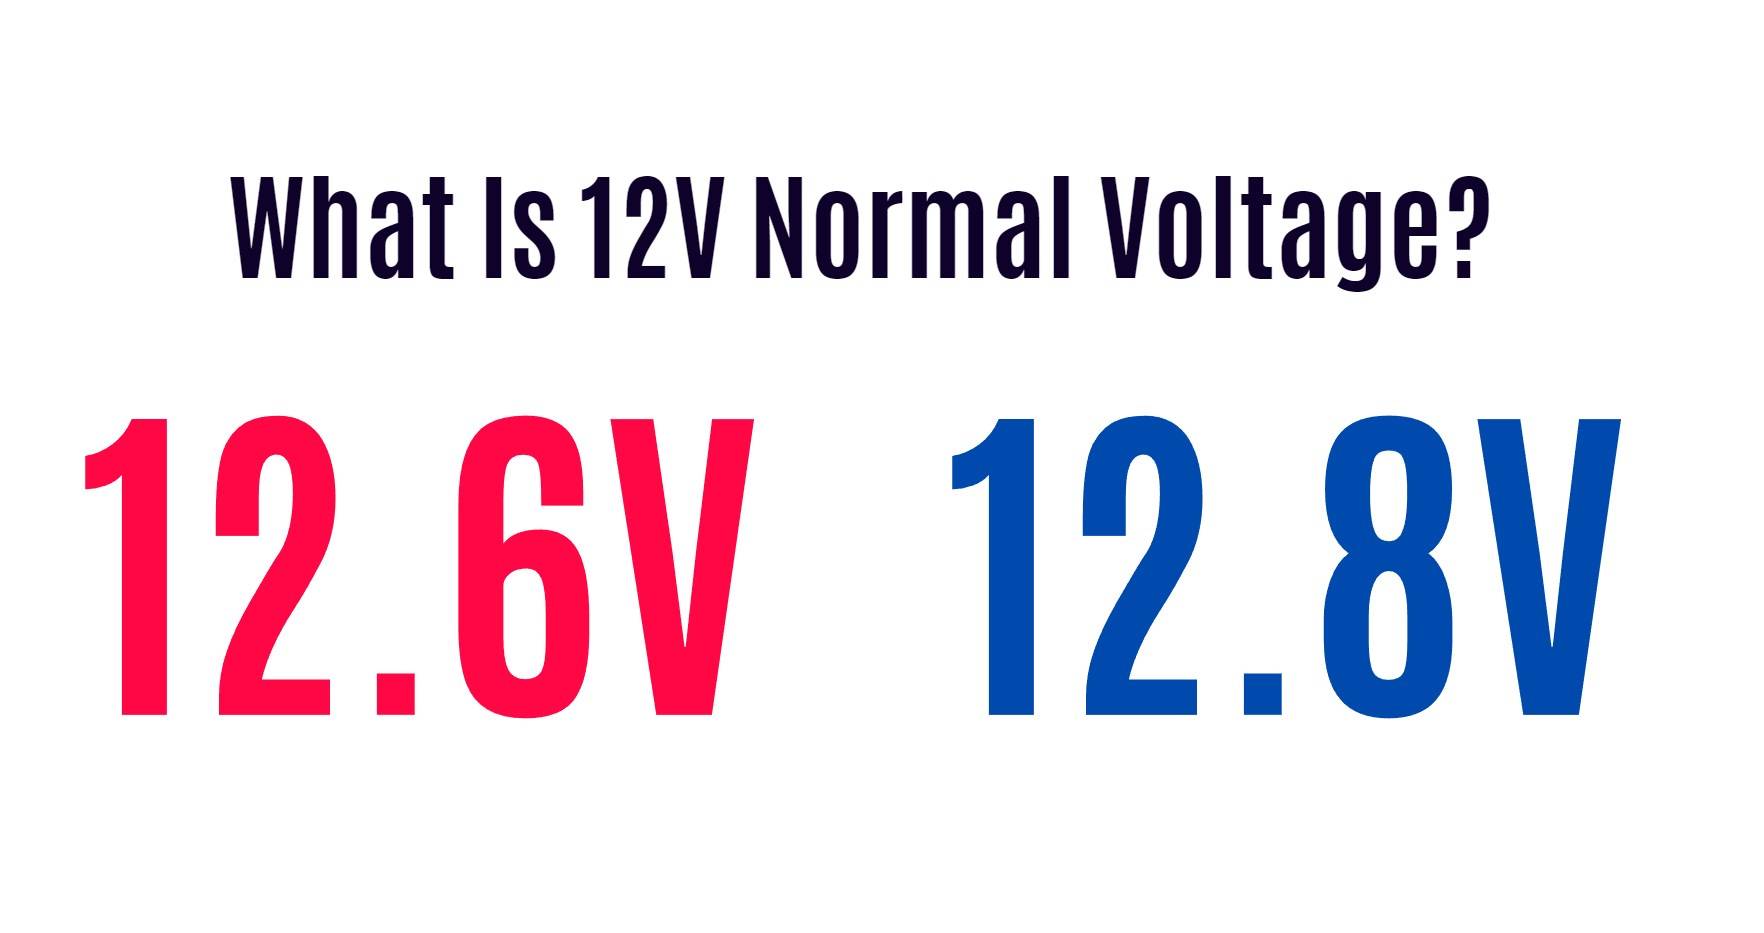 What Is 12v Normal Voltage?